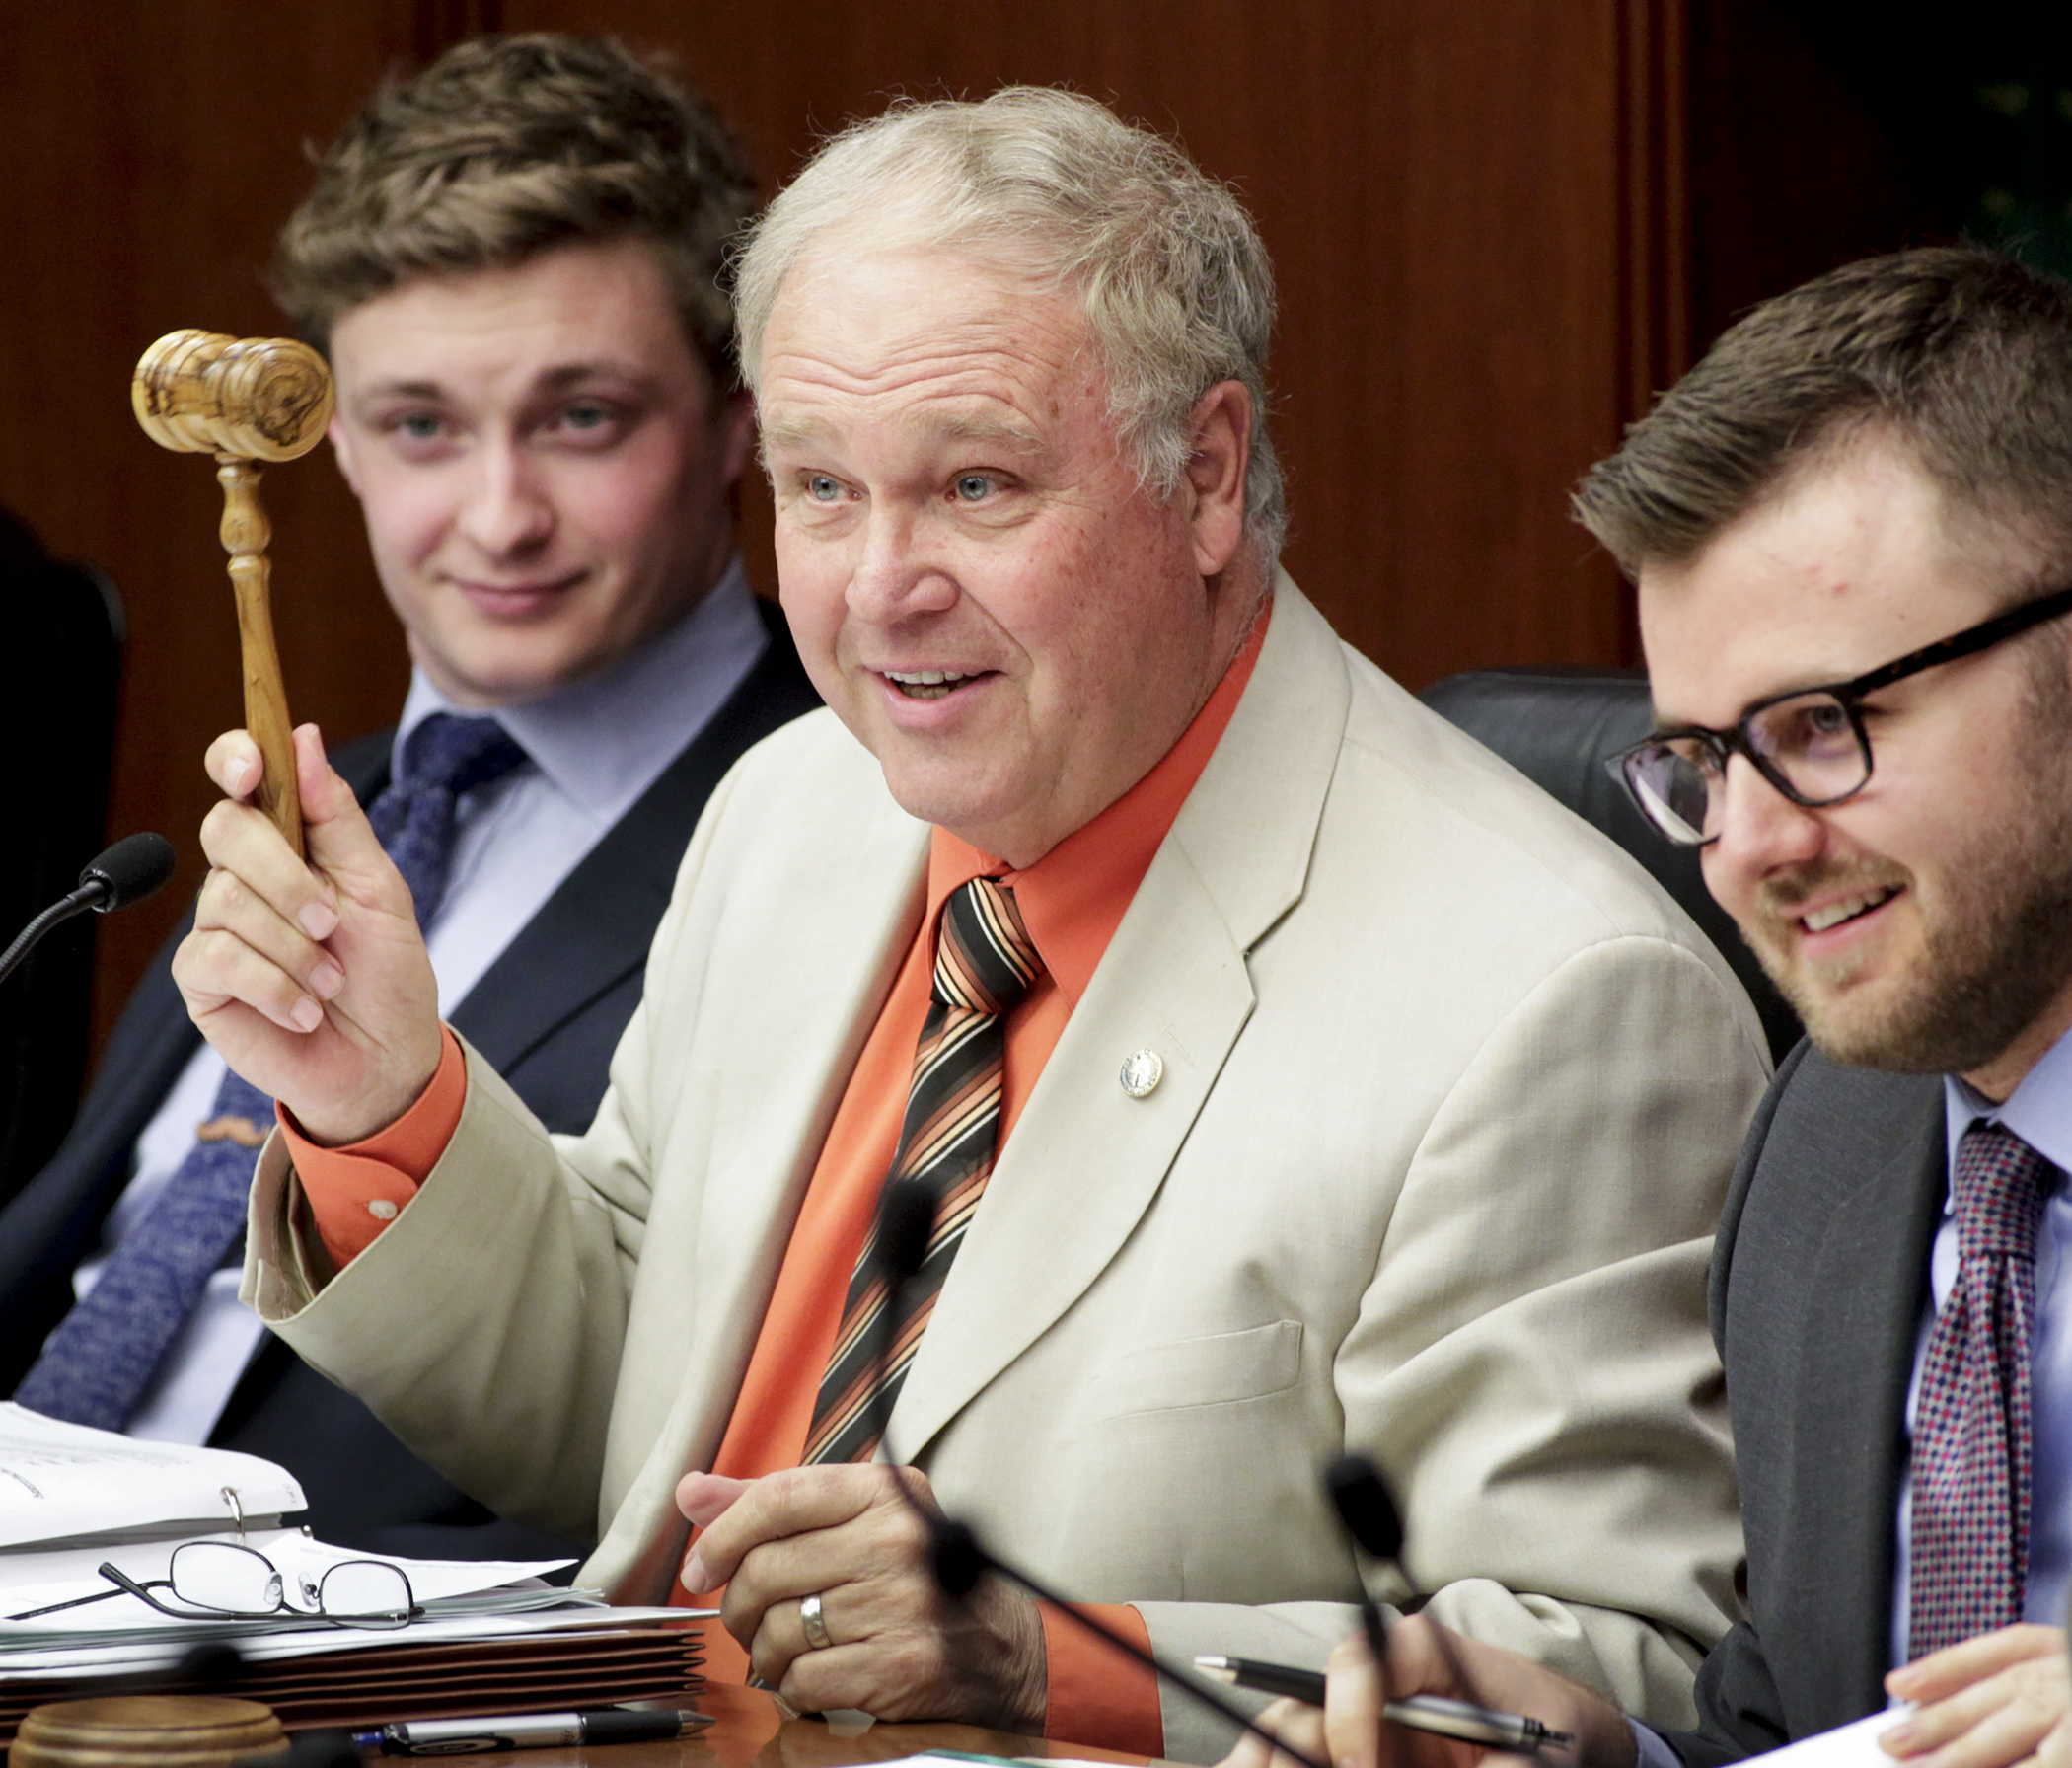 Rep. Dean Urdahl displays a new gavel made of wood from the Holy Land, given to him by his wife as a Christmas gift, after using it to begin the April 11 meeting of the House Legacy Funding Finance Committee. Photo by Paul Battaglia